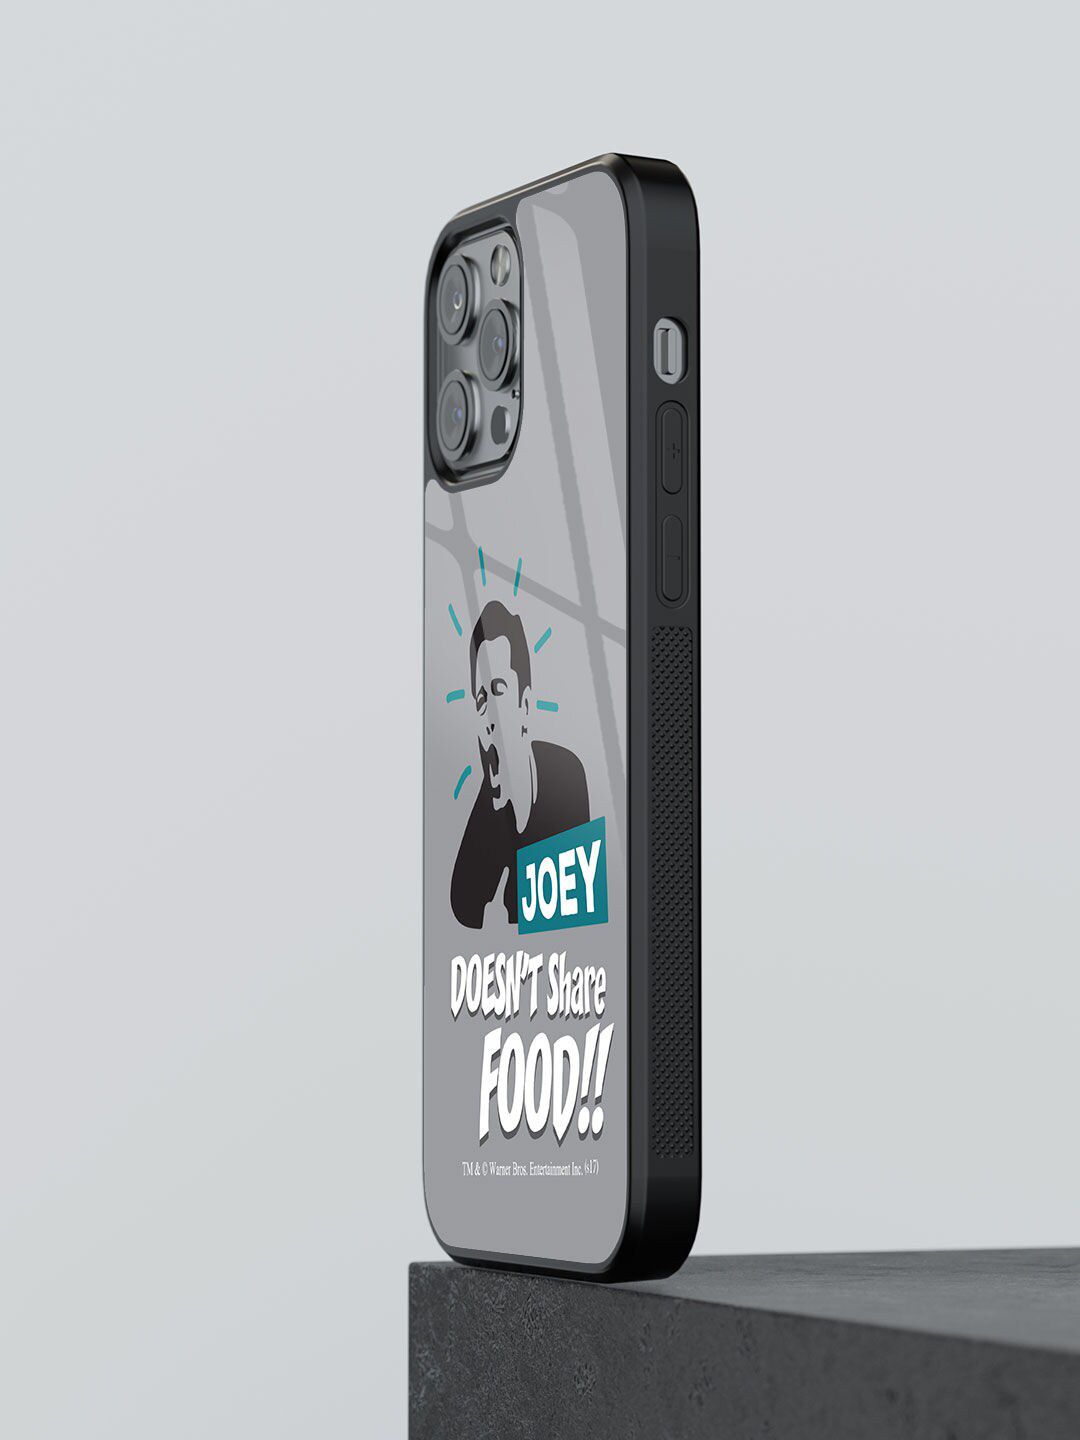 macmerise Grey Printed Friends Joey Doesn't Share Food iPhone 13 Pro Max Back Case Price in India